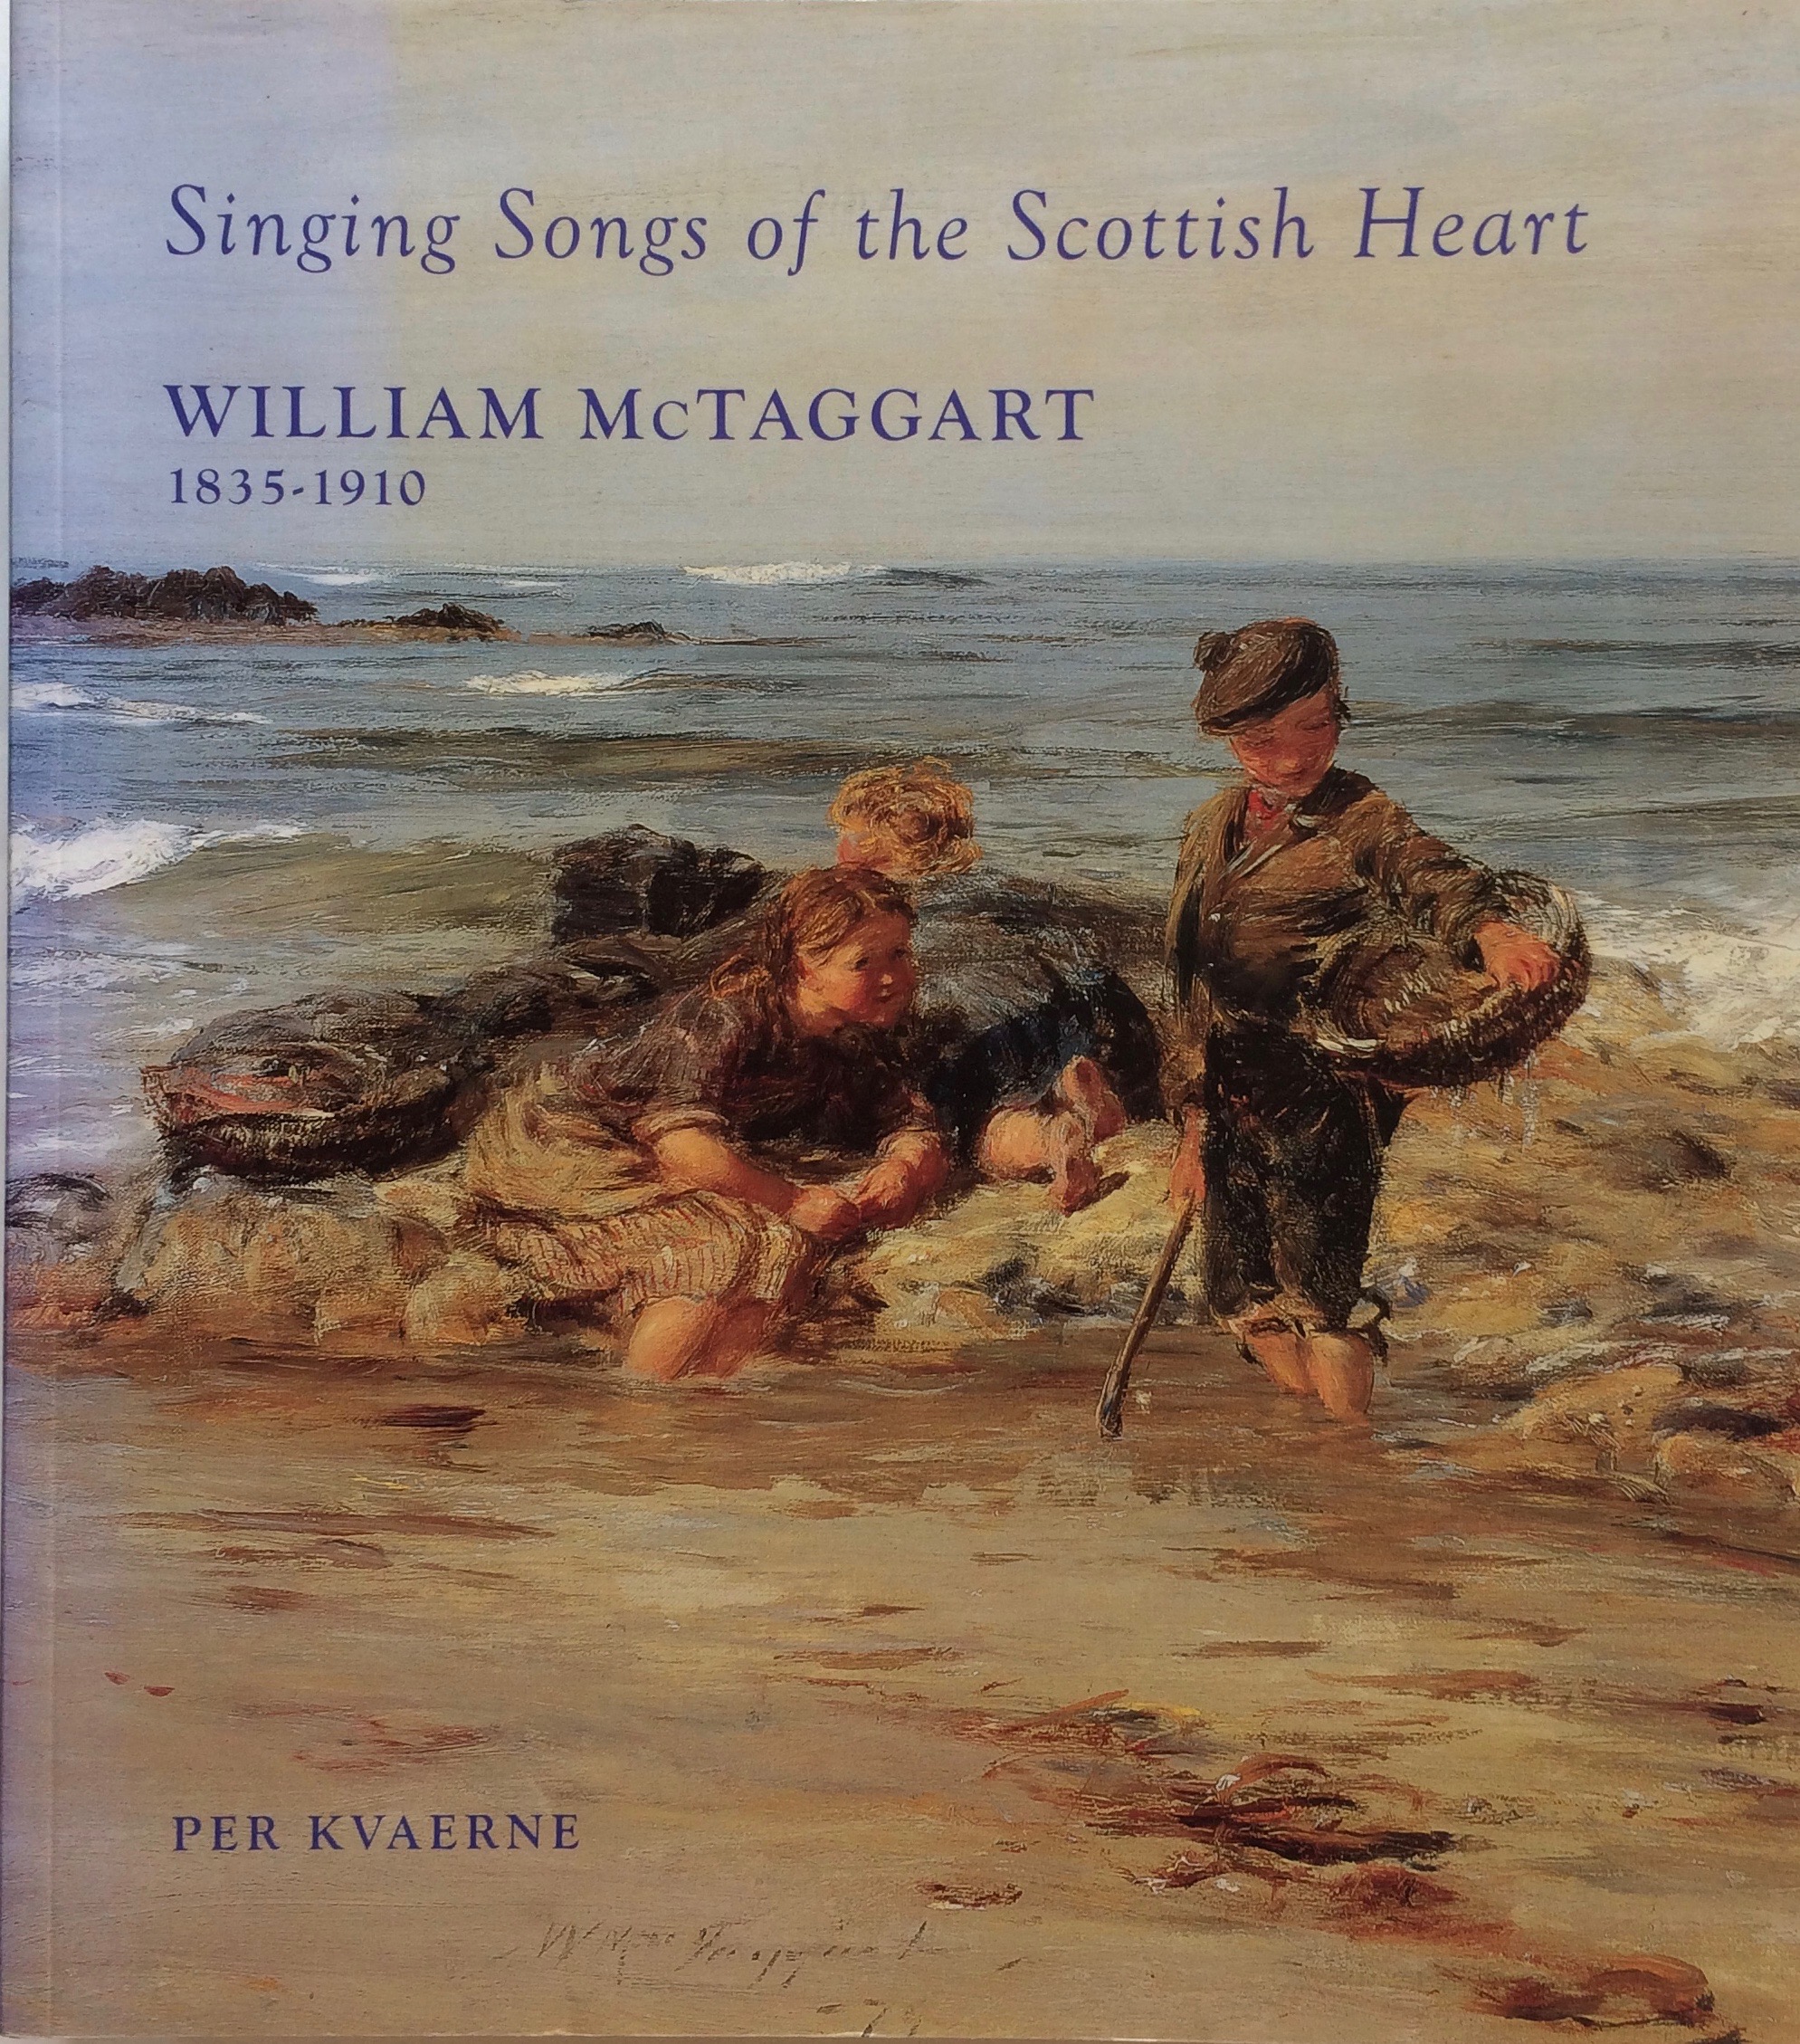 William McTaggart 1835-1910 Singing Songs of the Scottish Heart. - [WILLIAM McTAGGART] KVAERNE, PER